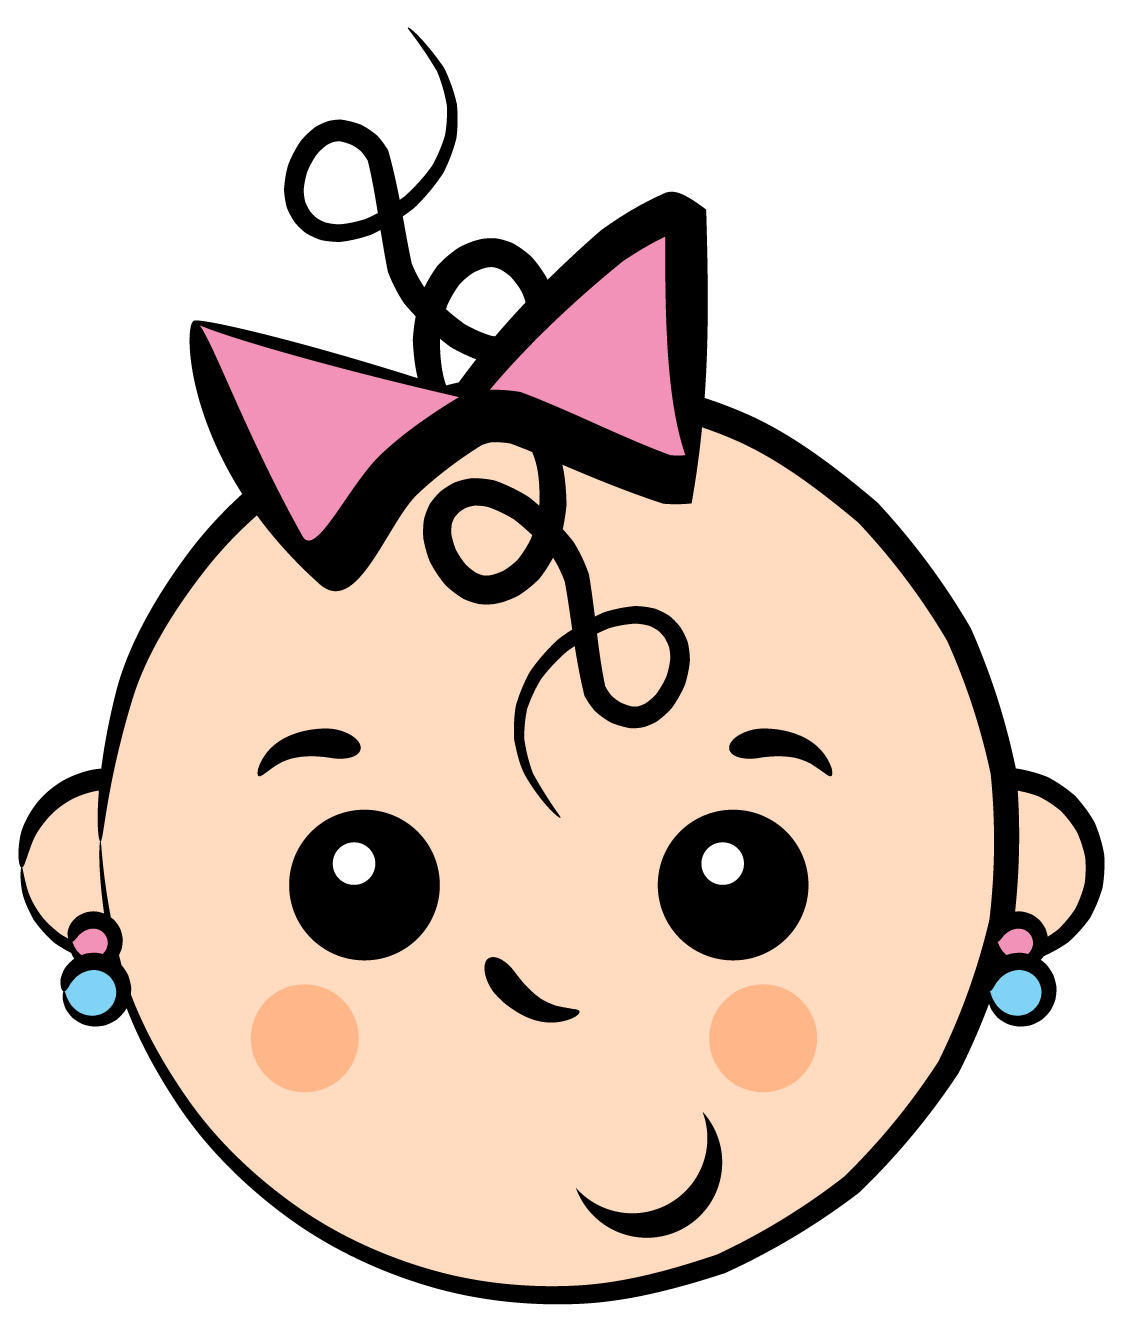 free baby clipart downloads - photo #30